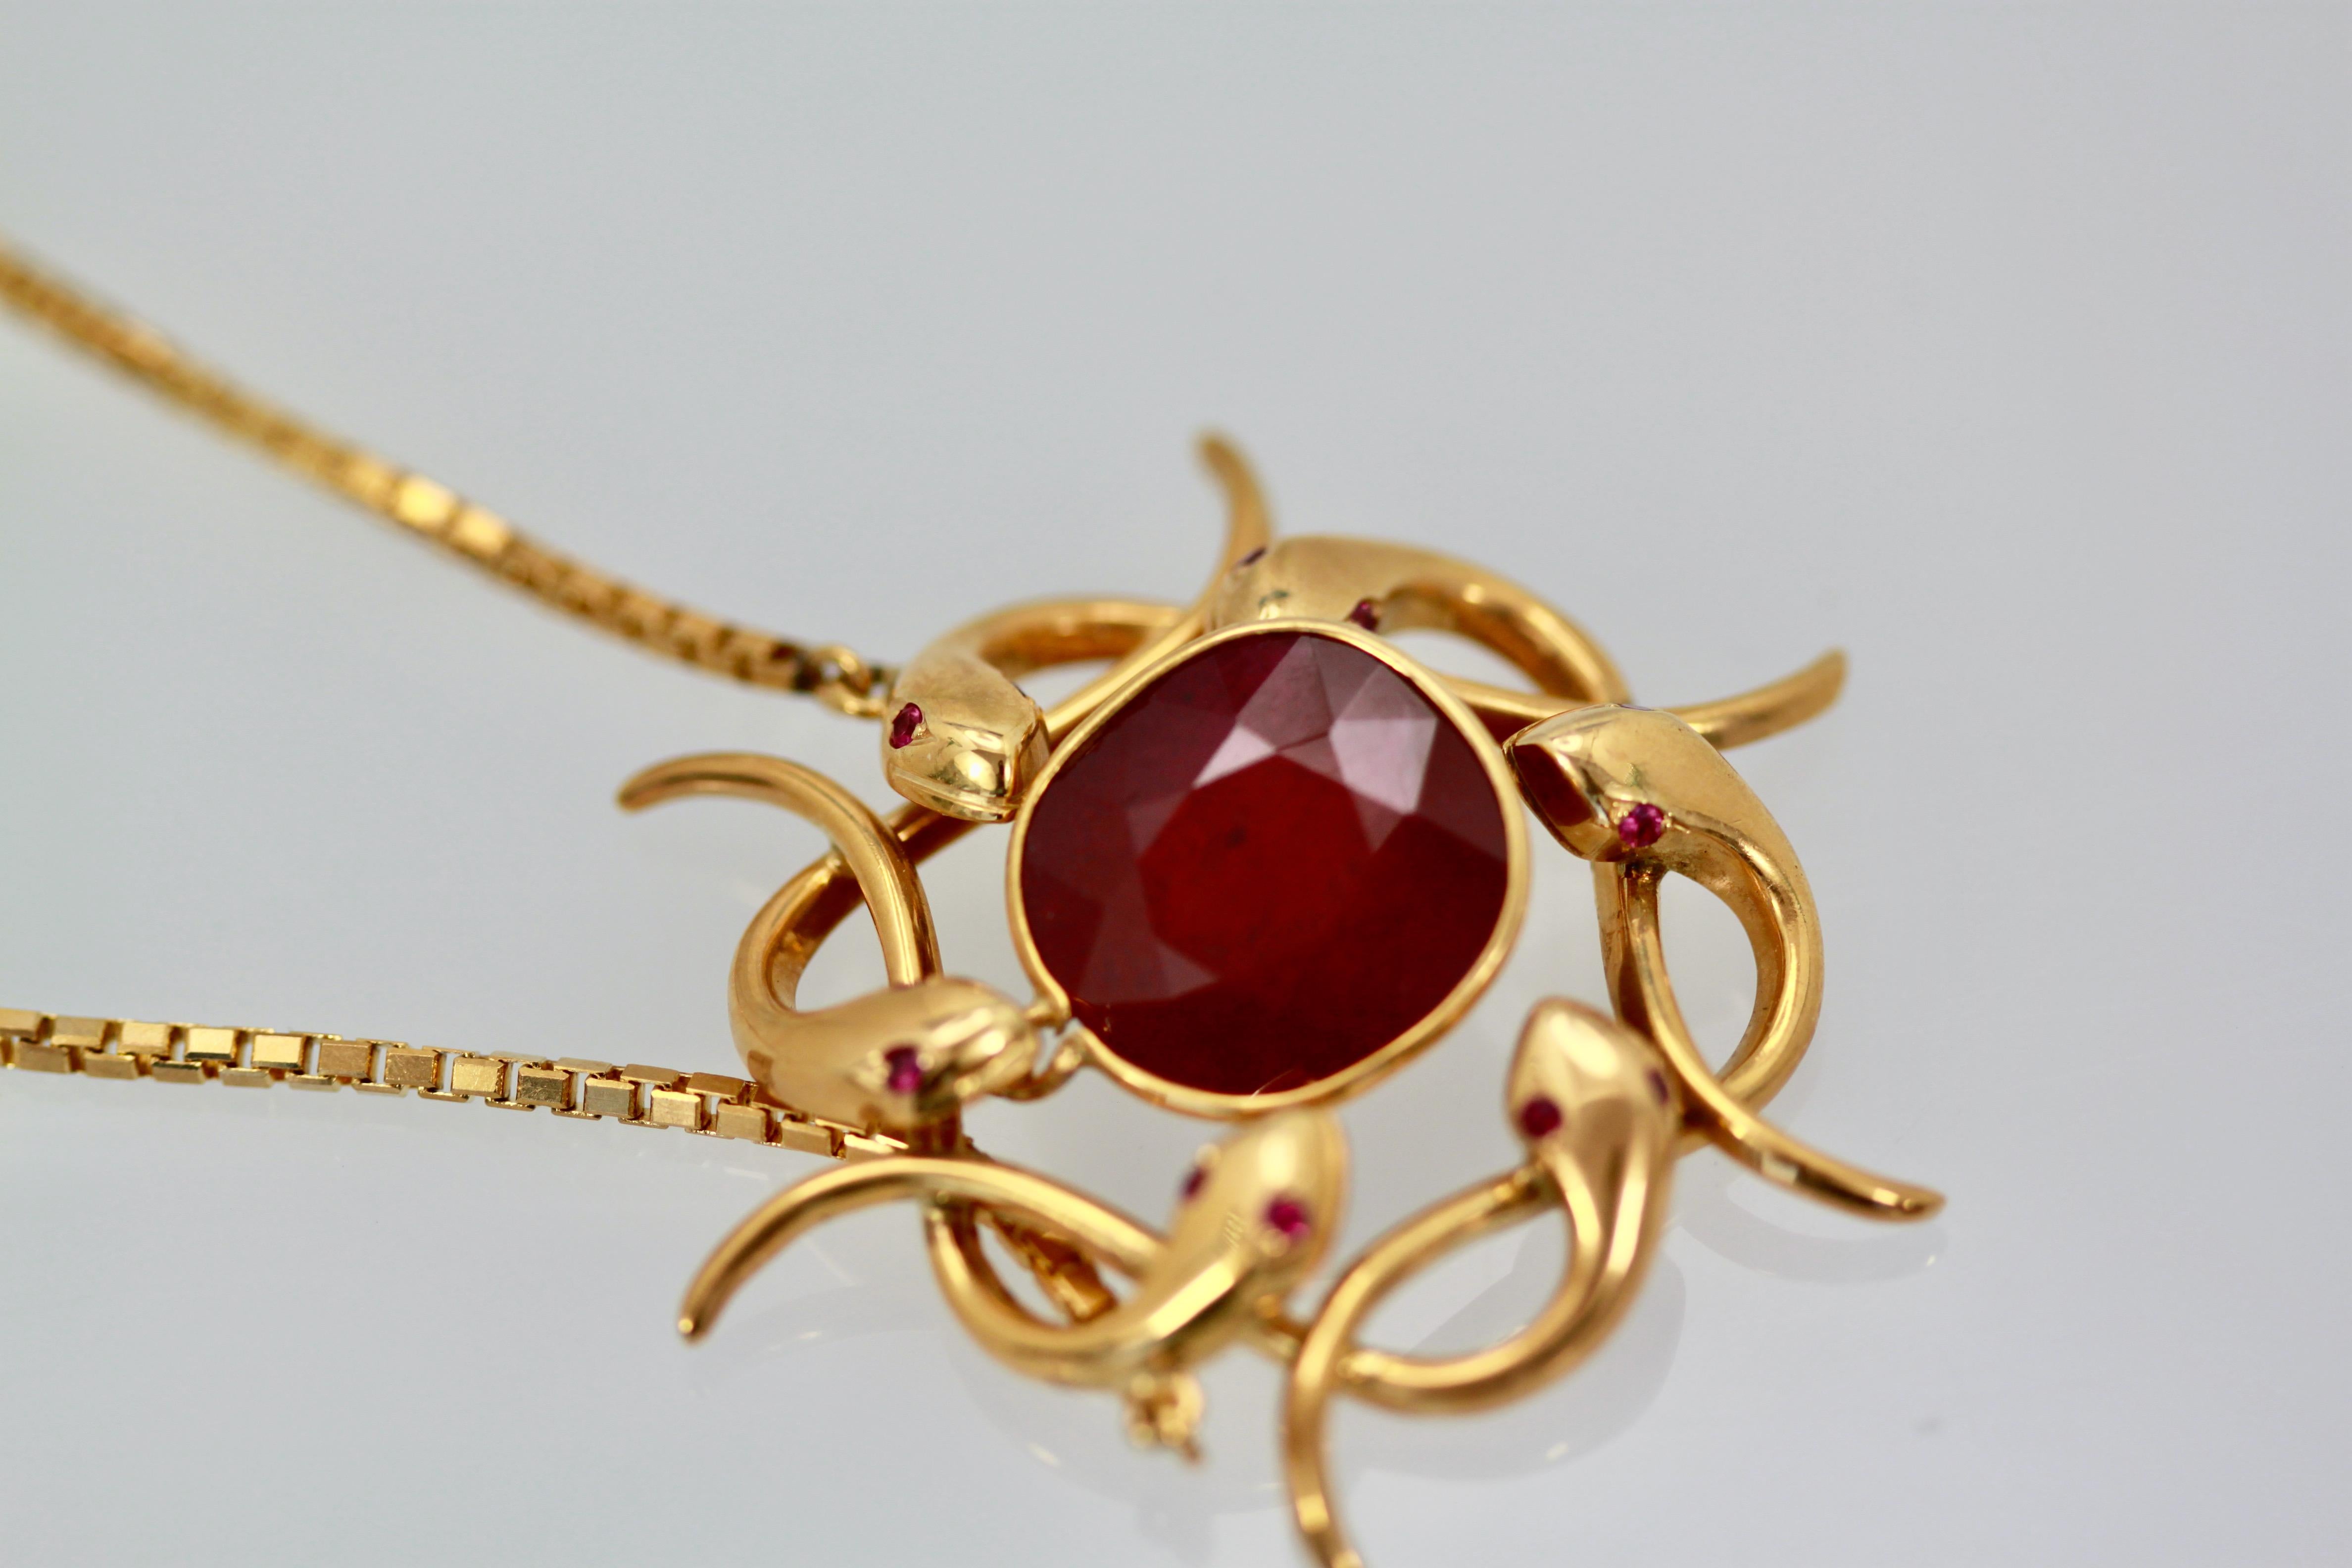 This amazingly unique pendant is a circle wreath made out of 14k yellow gold snakes with ruby eyes (not tested). There are 6 snakes that circle this pendant.  In the center swings a 9+ carat natural African ruby, which is just a gorgeous shade of